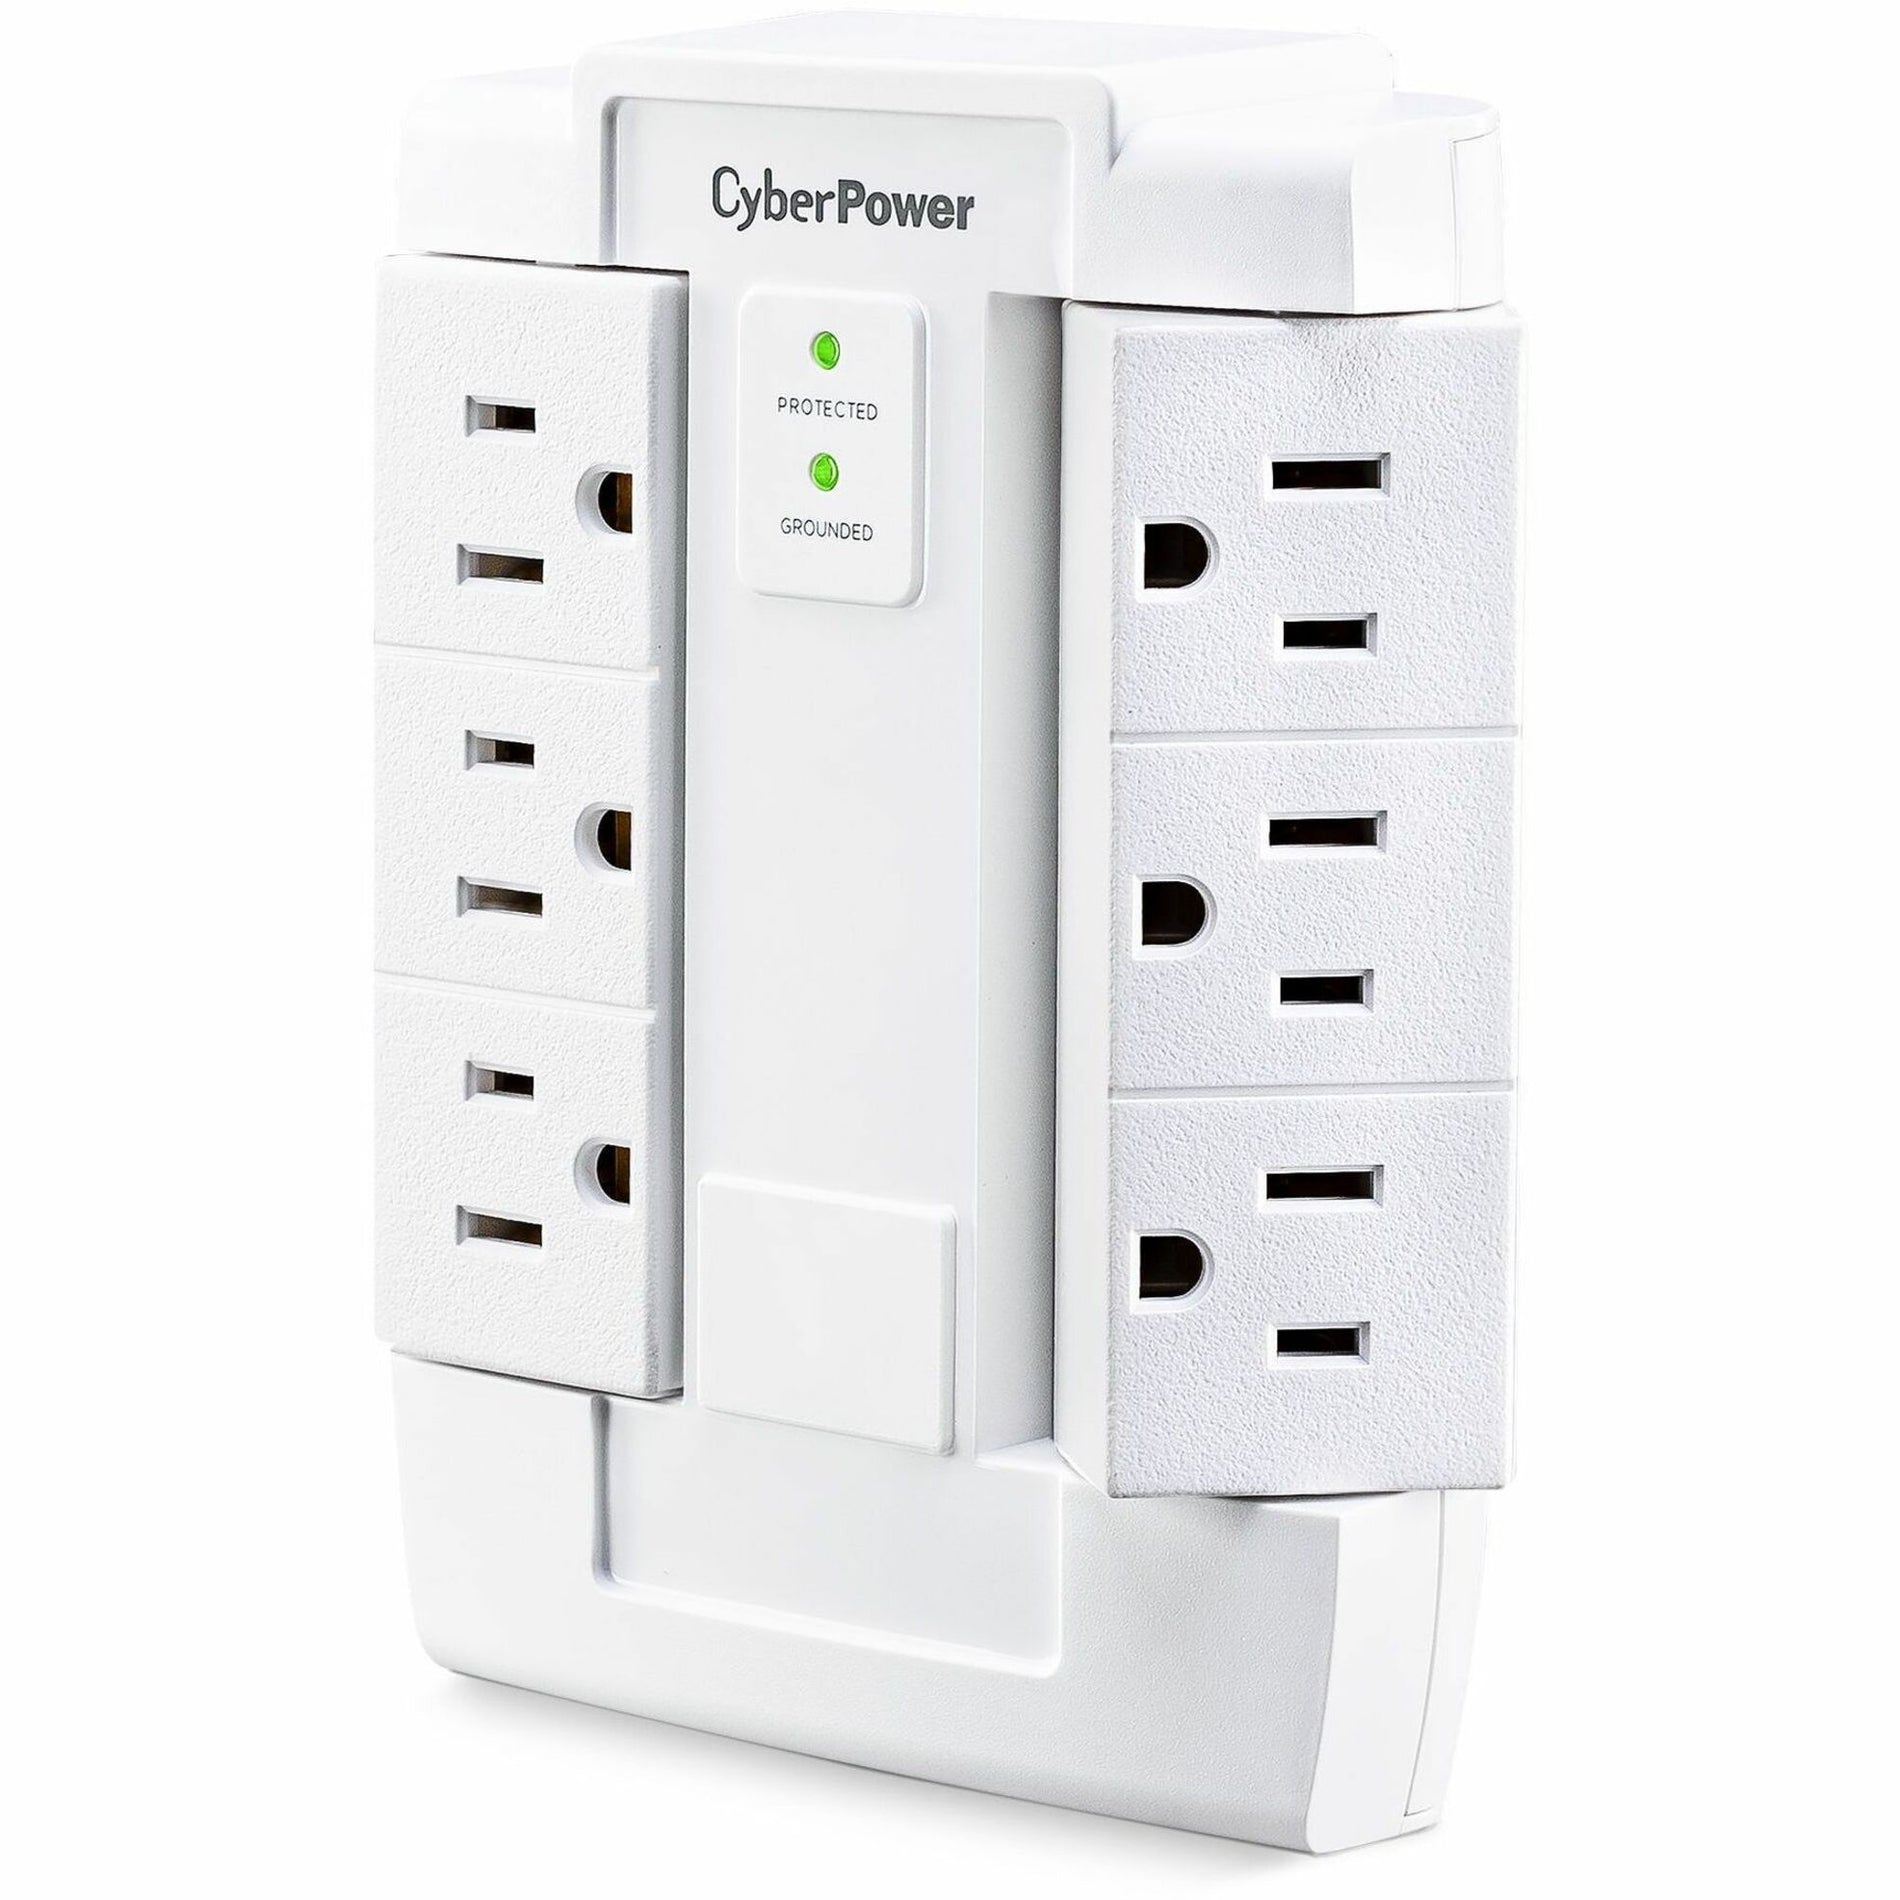 CyberPower CSB600WS Essential 6-Outlets Surge Suppressor Wall Tap and Swivel Outputs, 900 J Protection